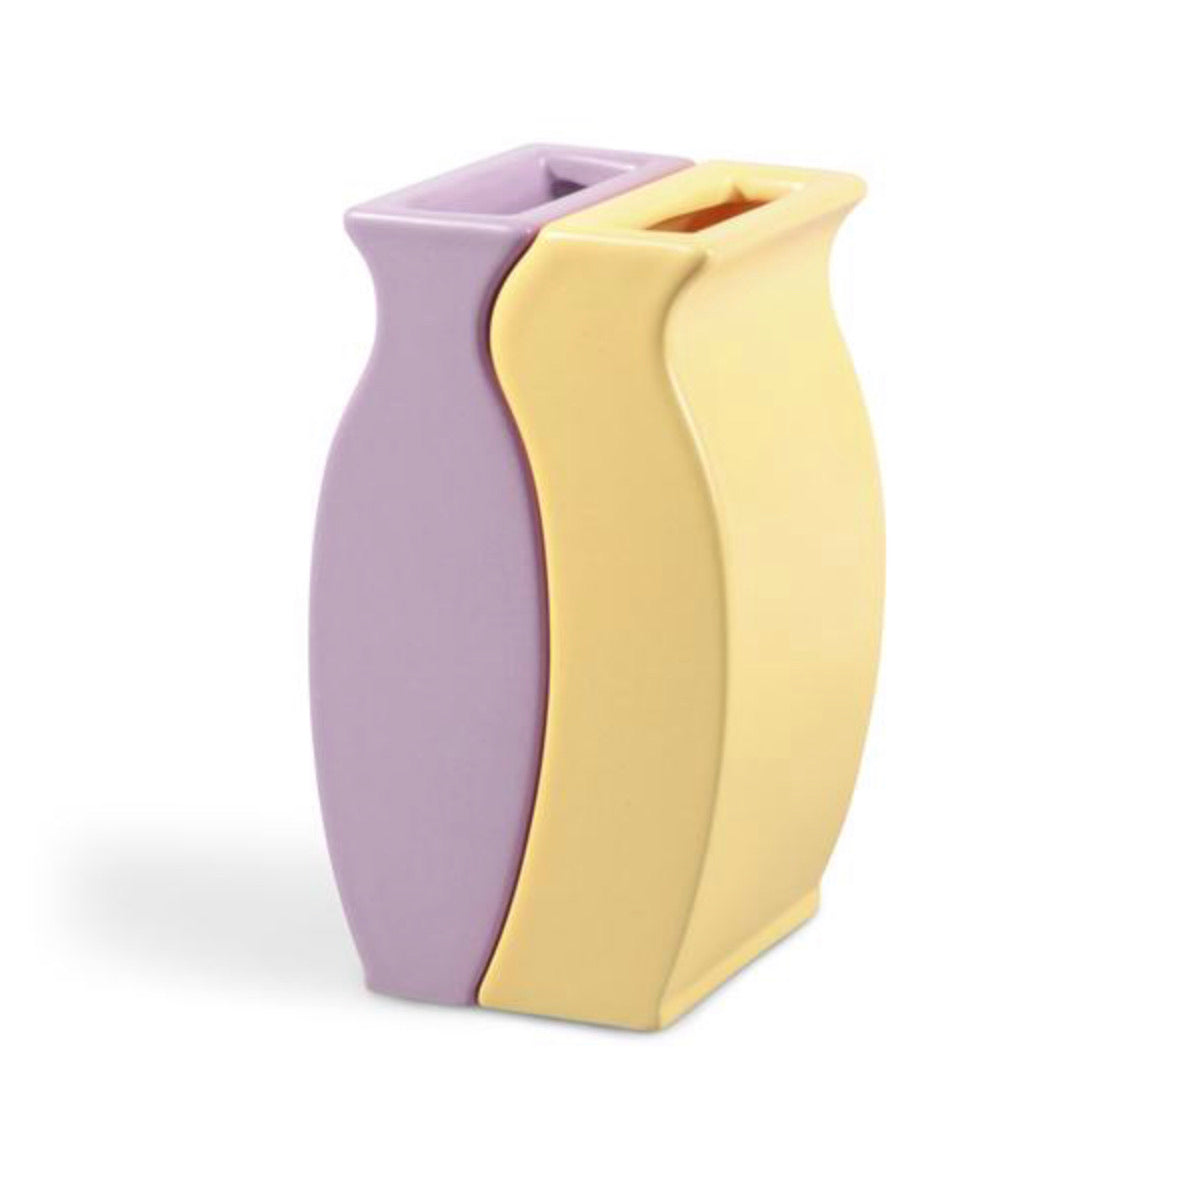 Wavey Lilac and Yellow Vase Set of 2